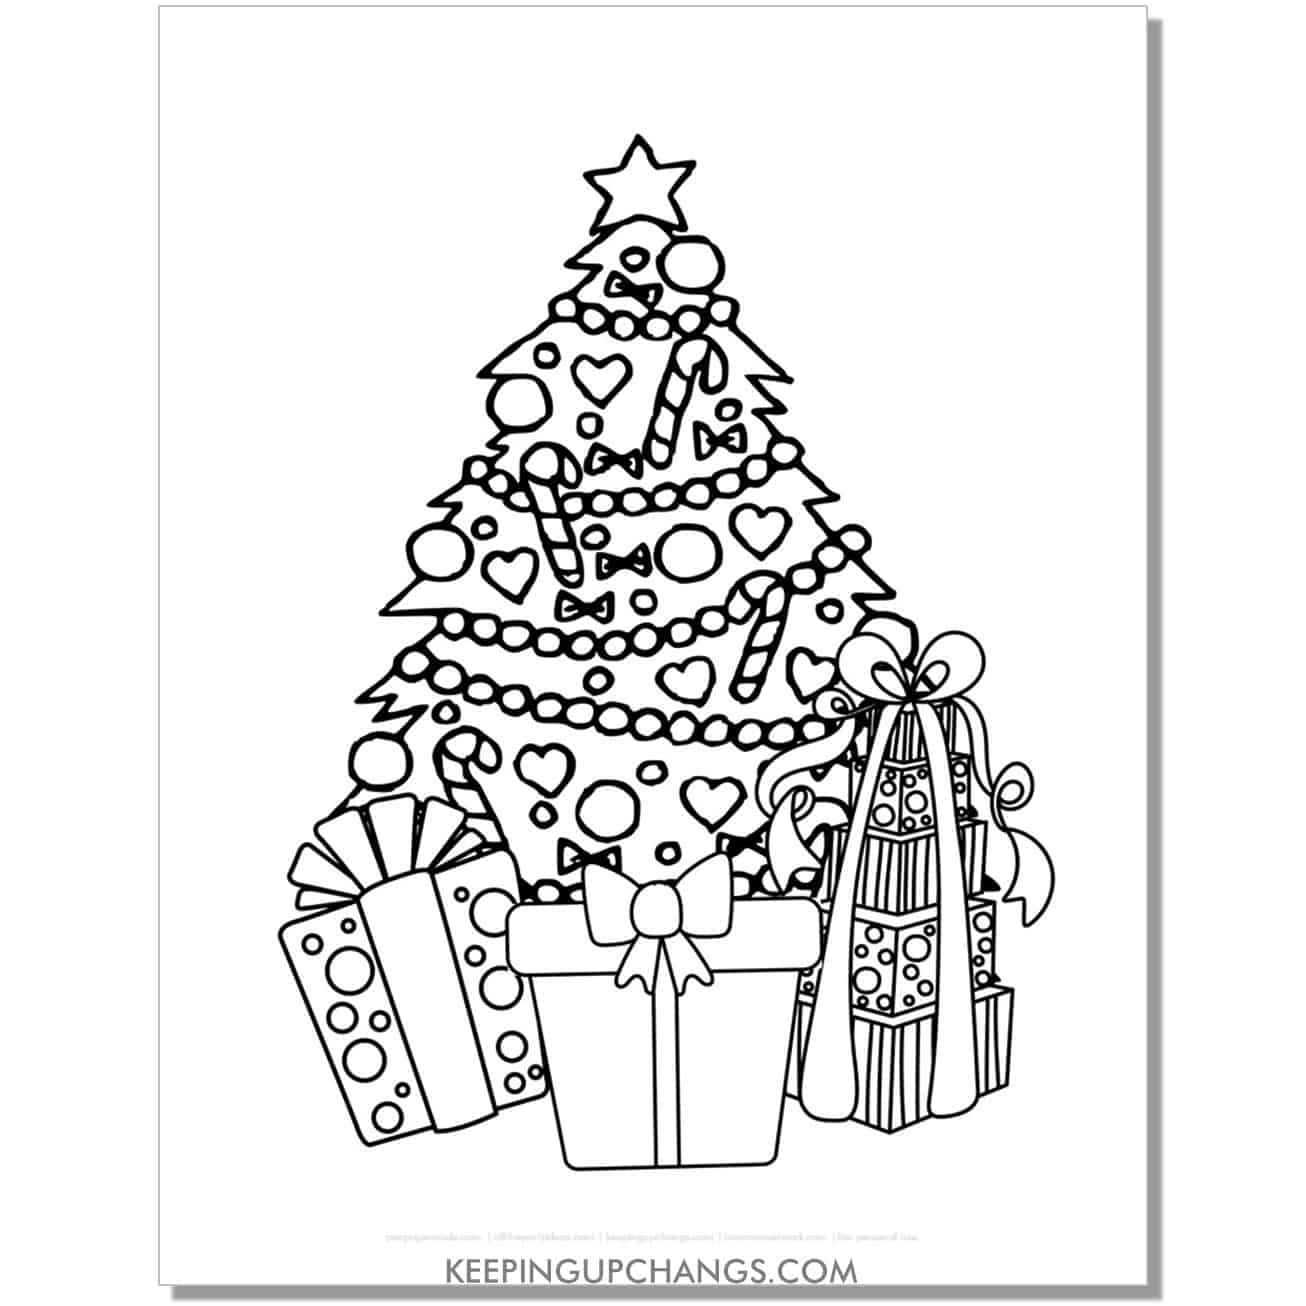 free hand drawn christmas tree with stacks of presents coloring page.